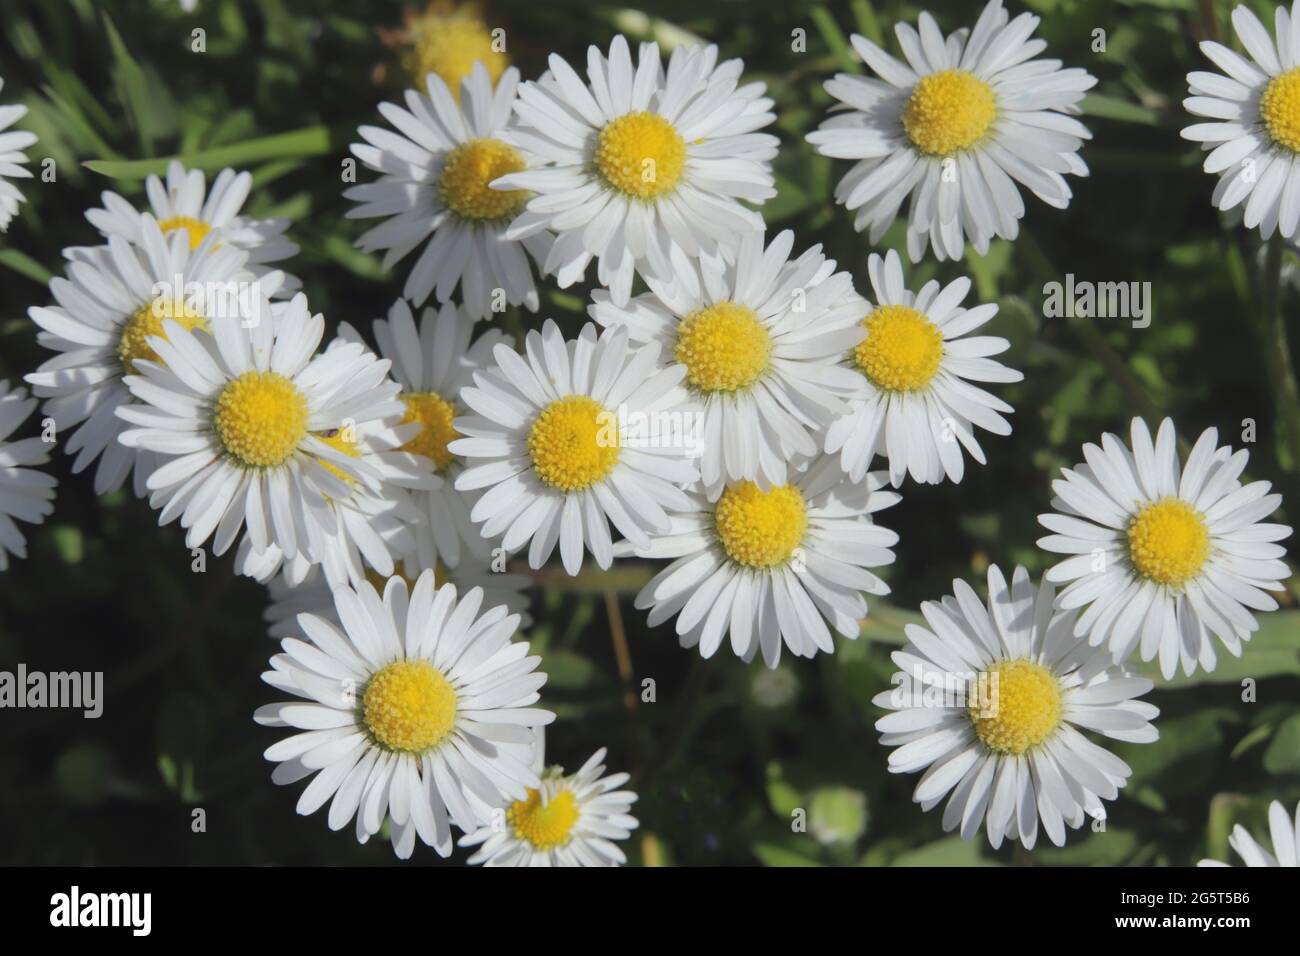 common daisy, lawn daisy, English daisy (Bellis perennis), top view on some flower heads, Germany, North Rhine-Westphalia Stock Photo